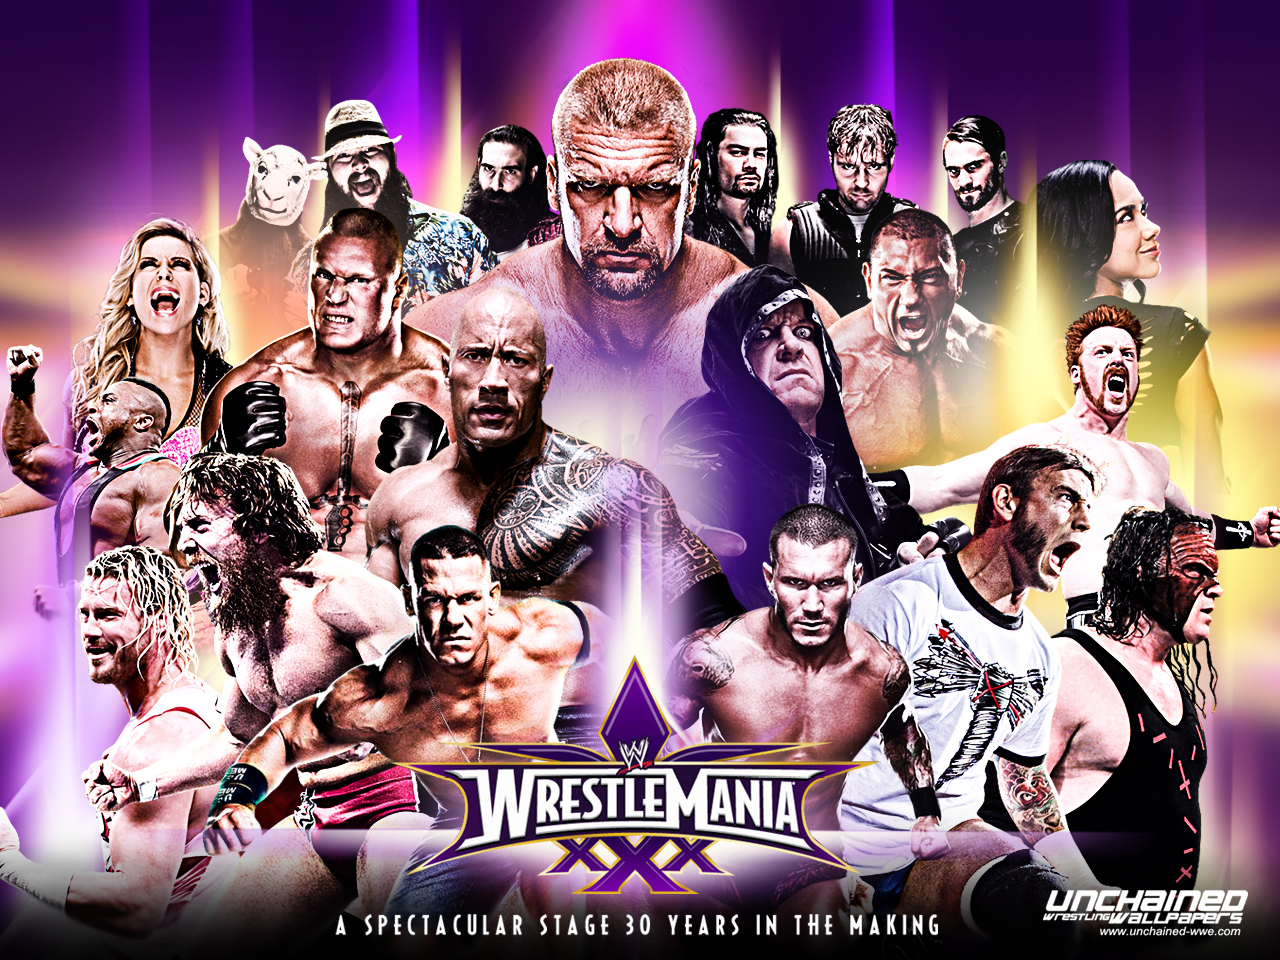 WWE images WWE Wrestlemania   30 years in the making wallpaper photos